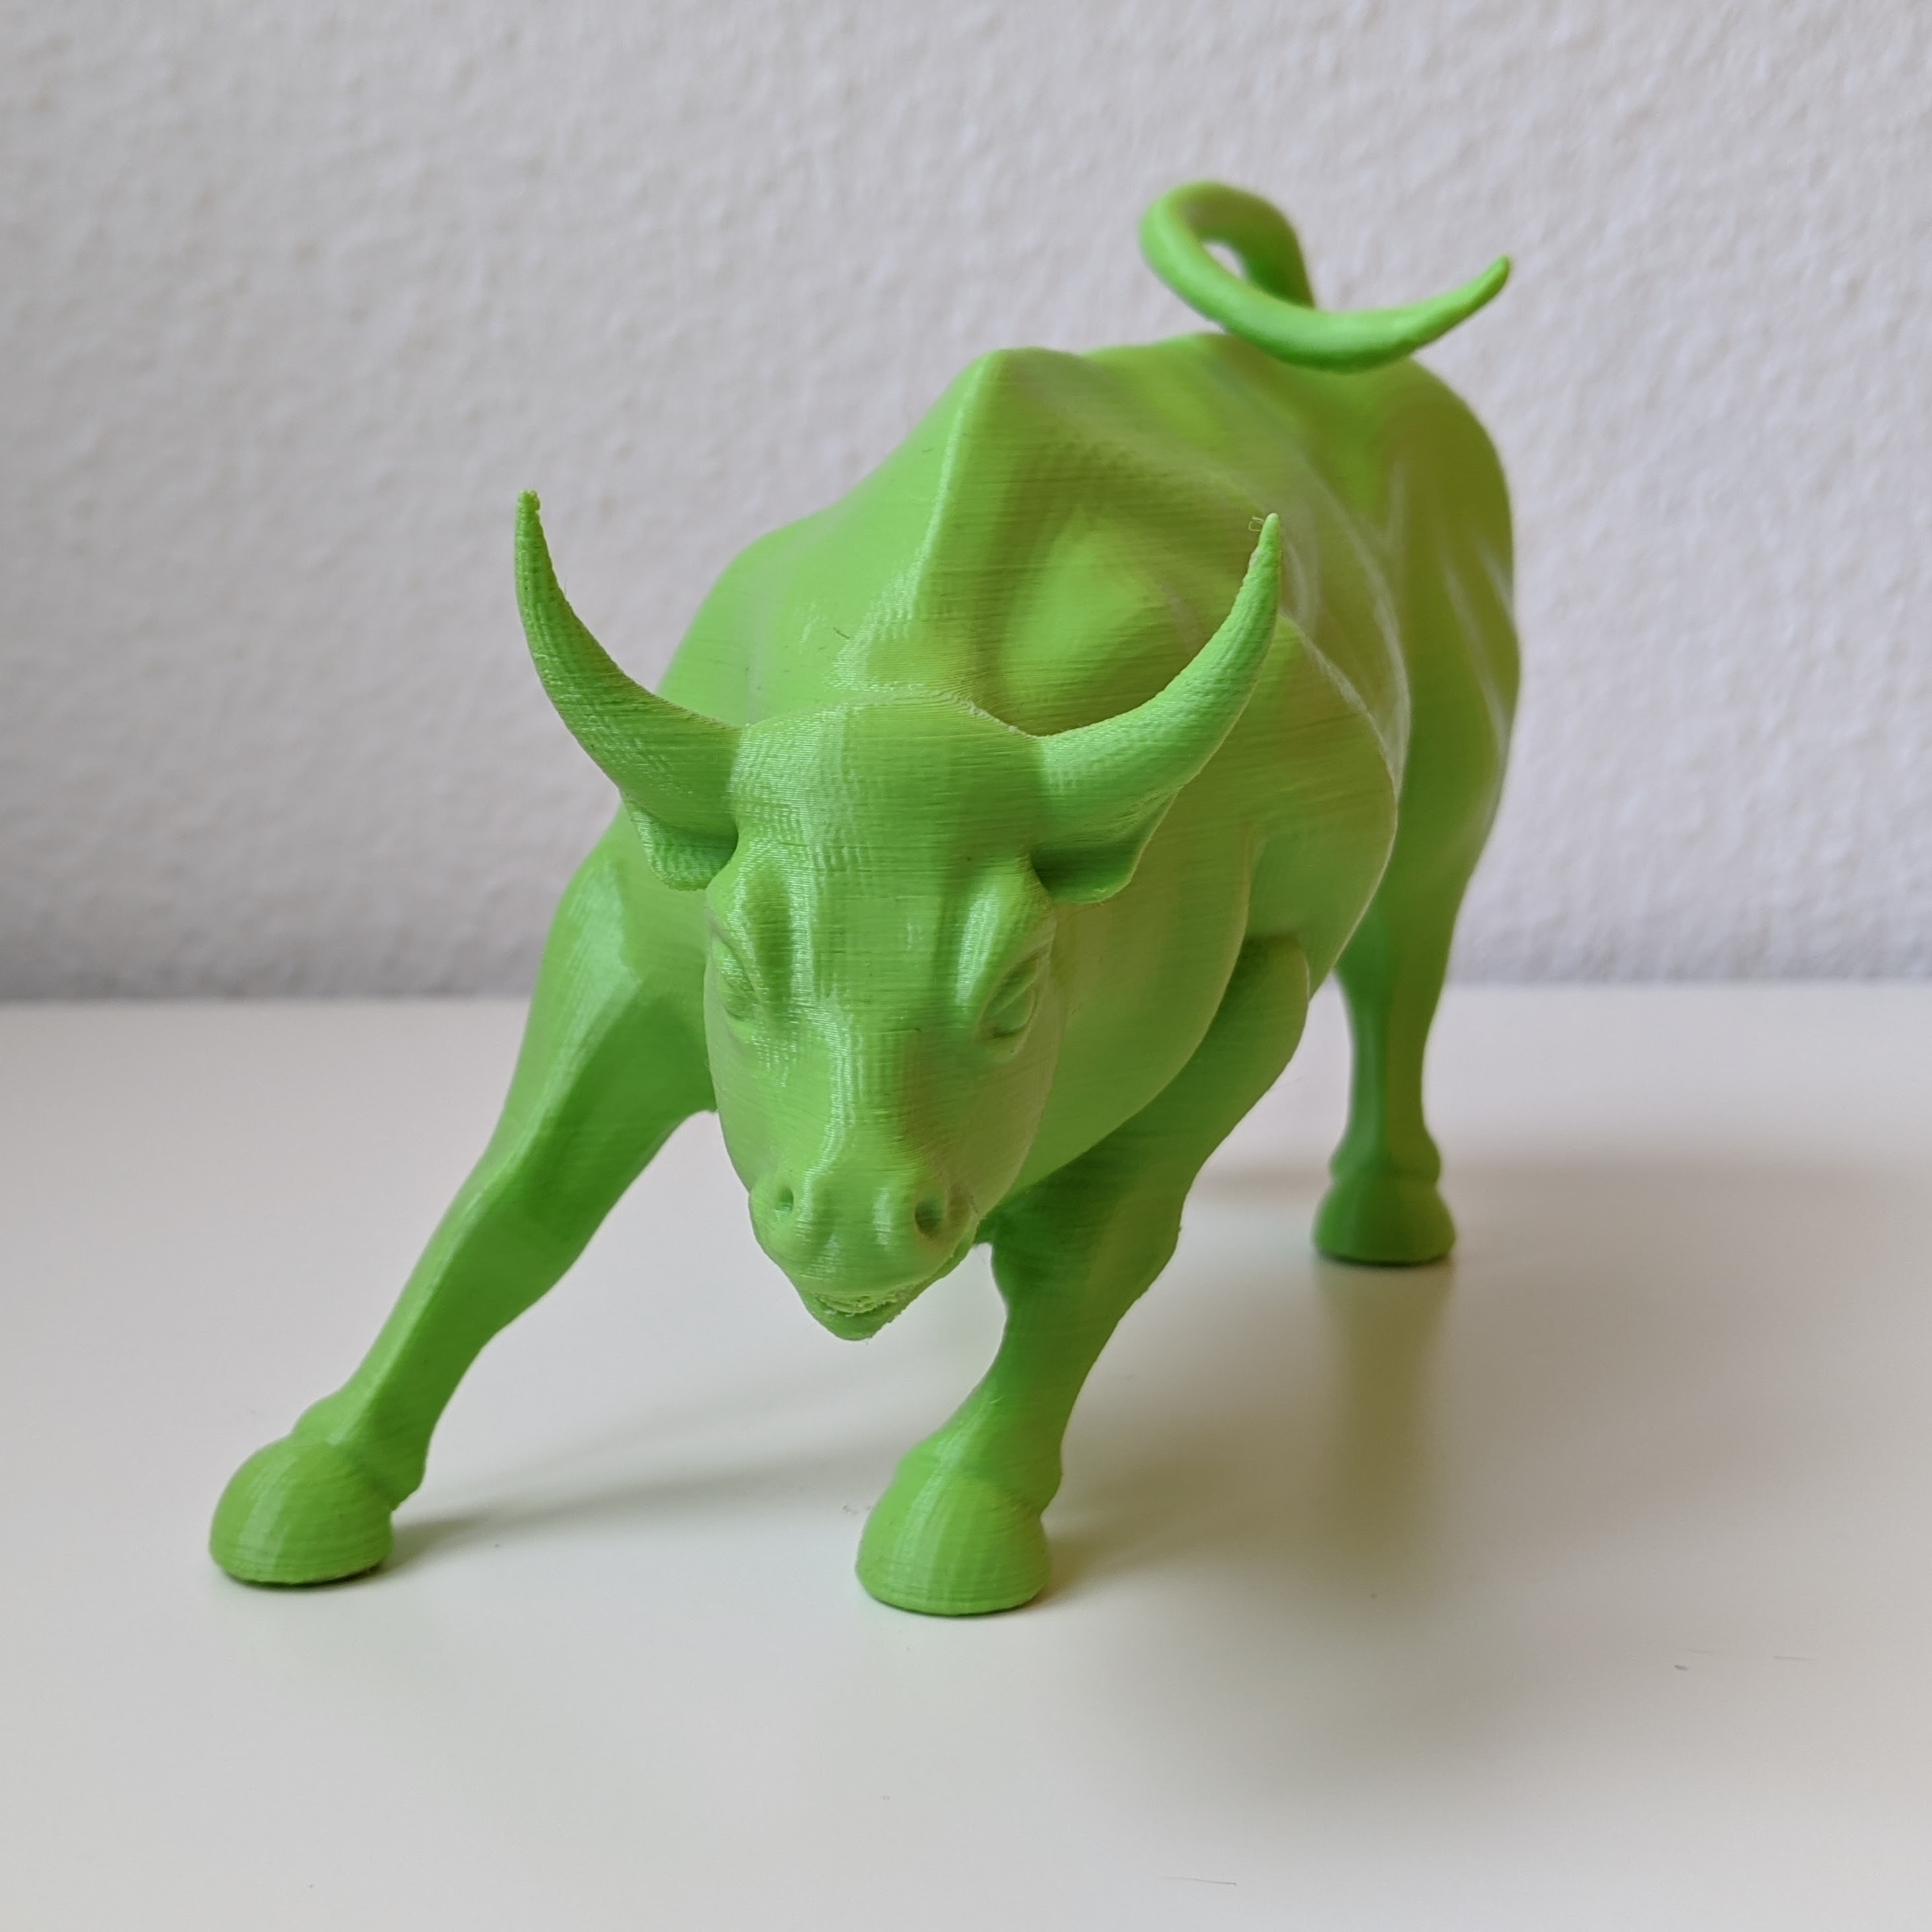 3D Printable Wall Street Bull by Rose